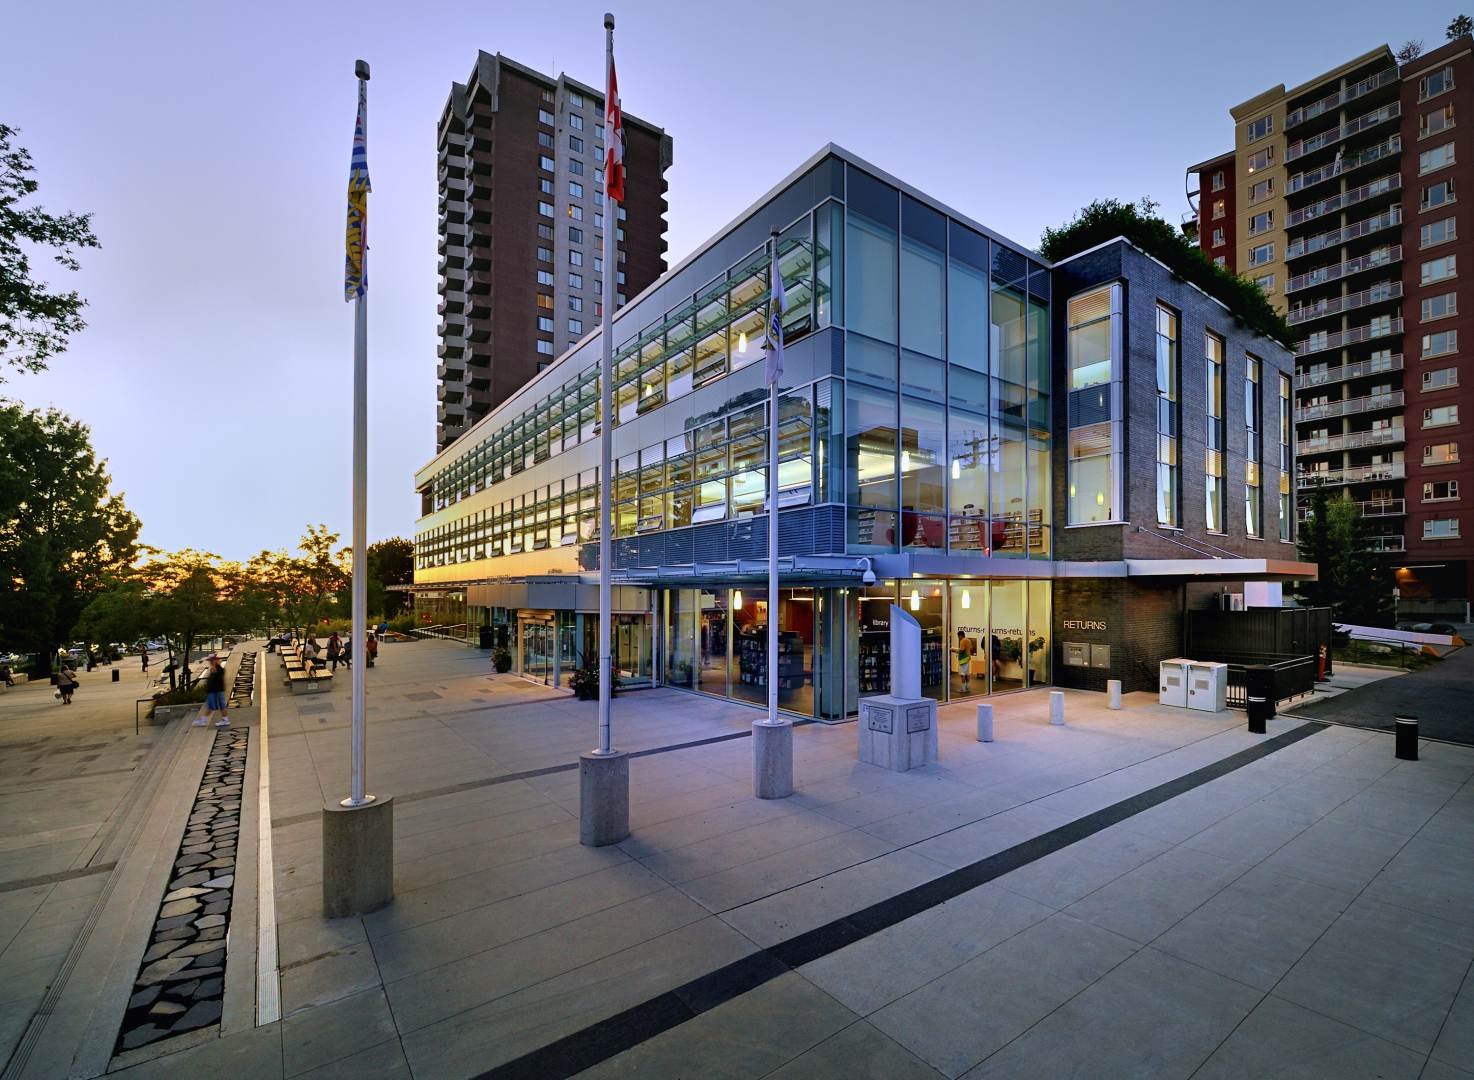 North Vancouver City Library